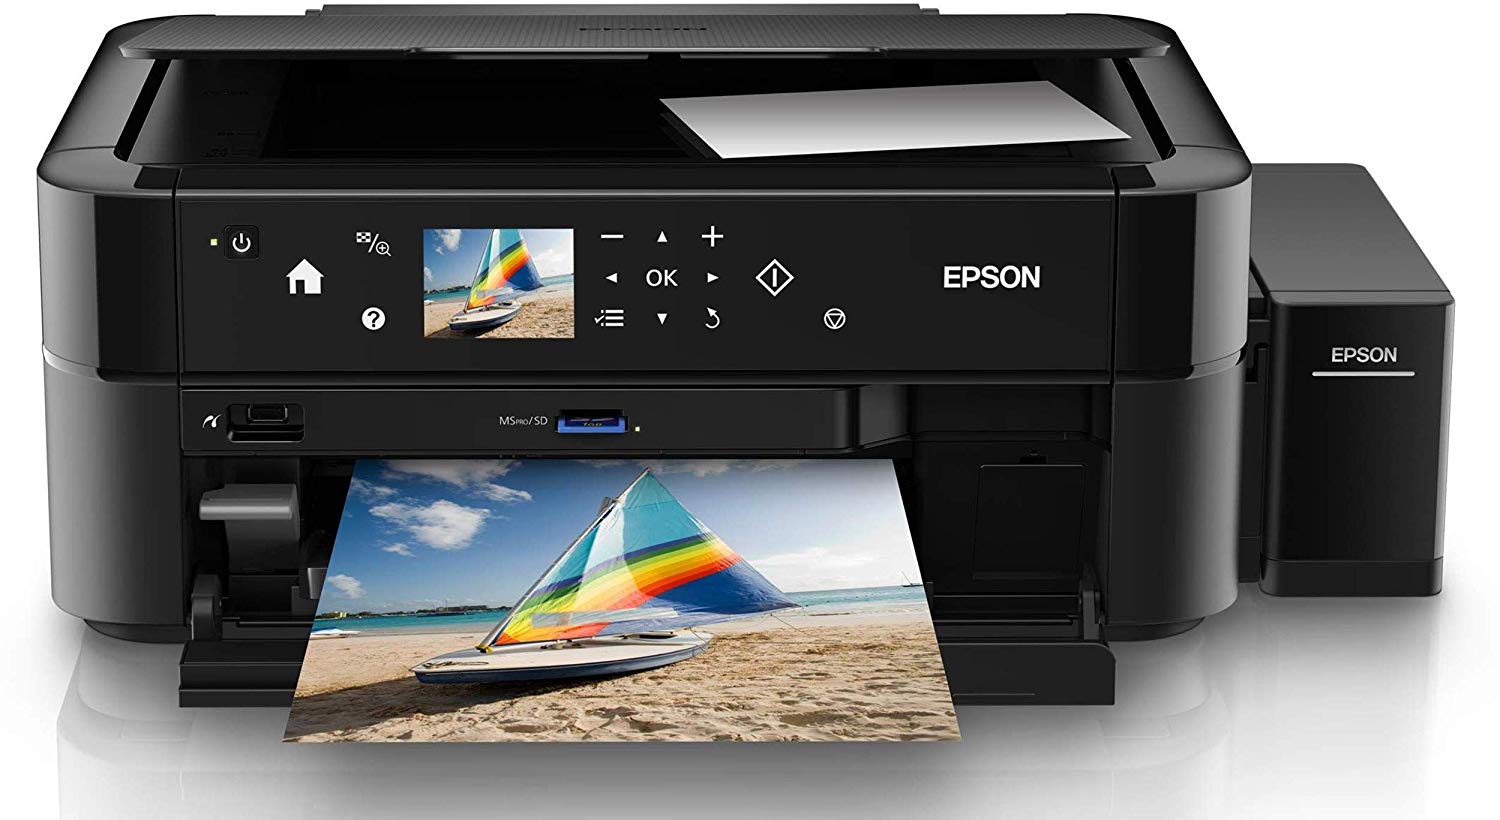 Epson M205 Driver Download / Epson M205 Driver Download : Baixar Drivers da Impressora ... - Epson m205 series driver direct download was reported as adequate by a large percentage of our reporters, so it should be good to download and after downloading and installing epson m205 series, or the driver installation manager, take a few minutes to send us a report: